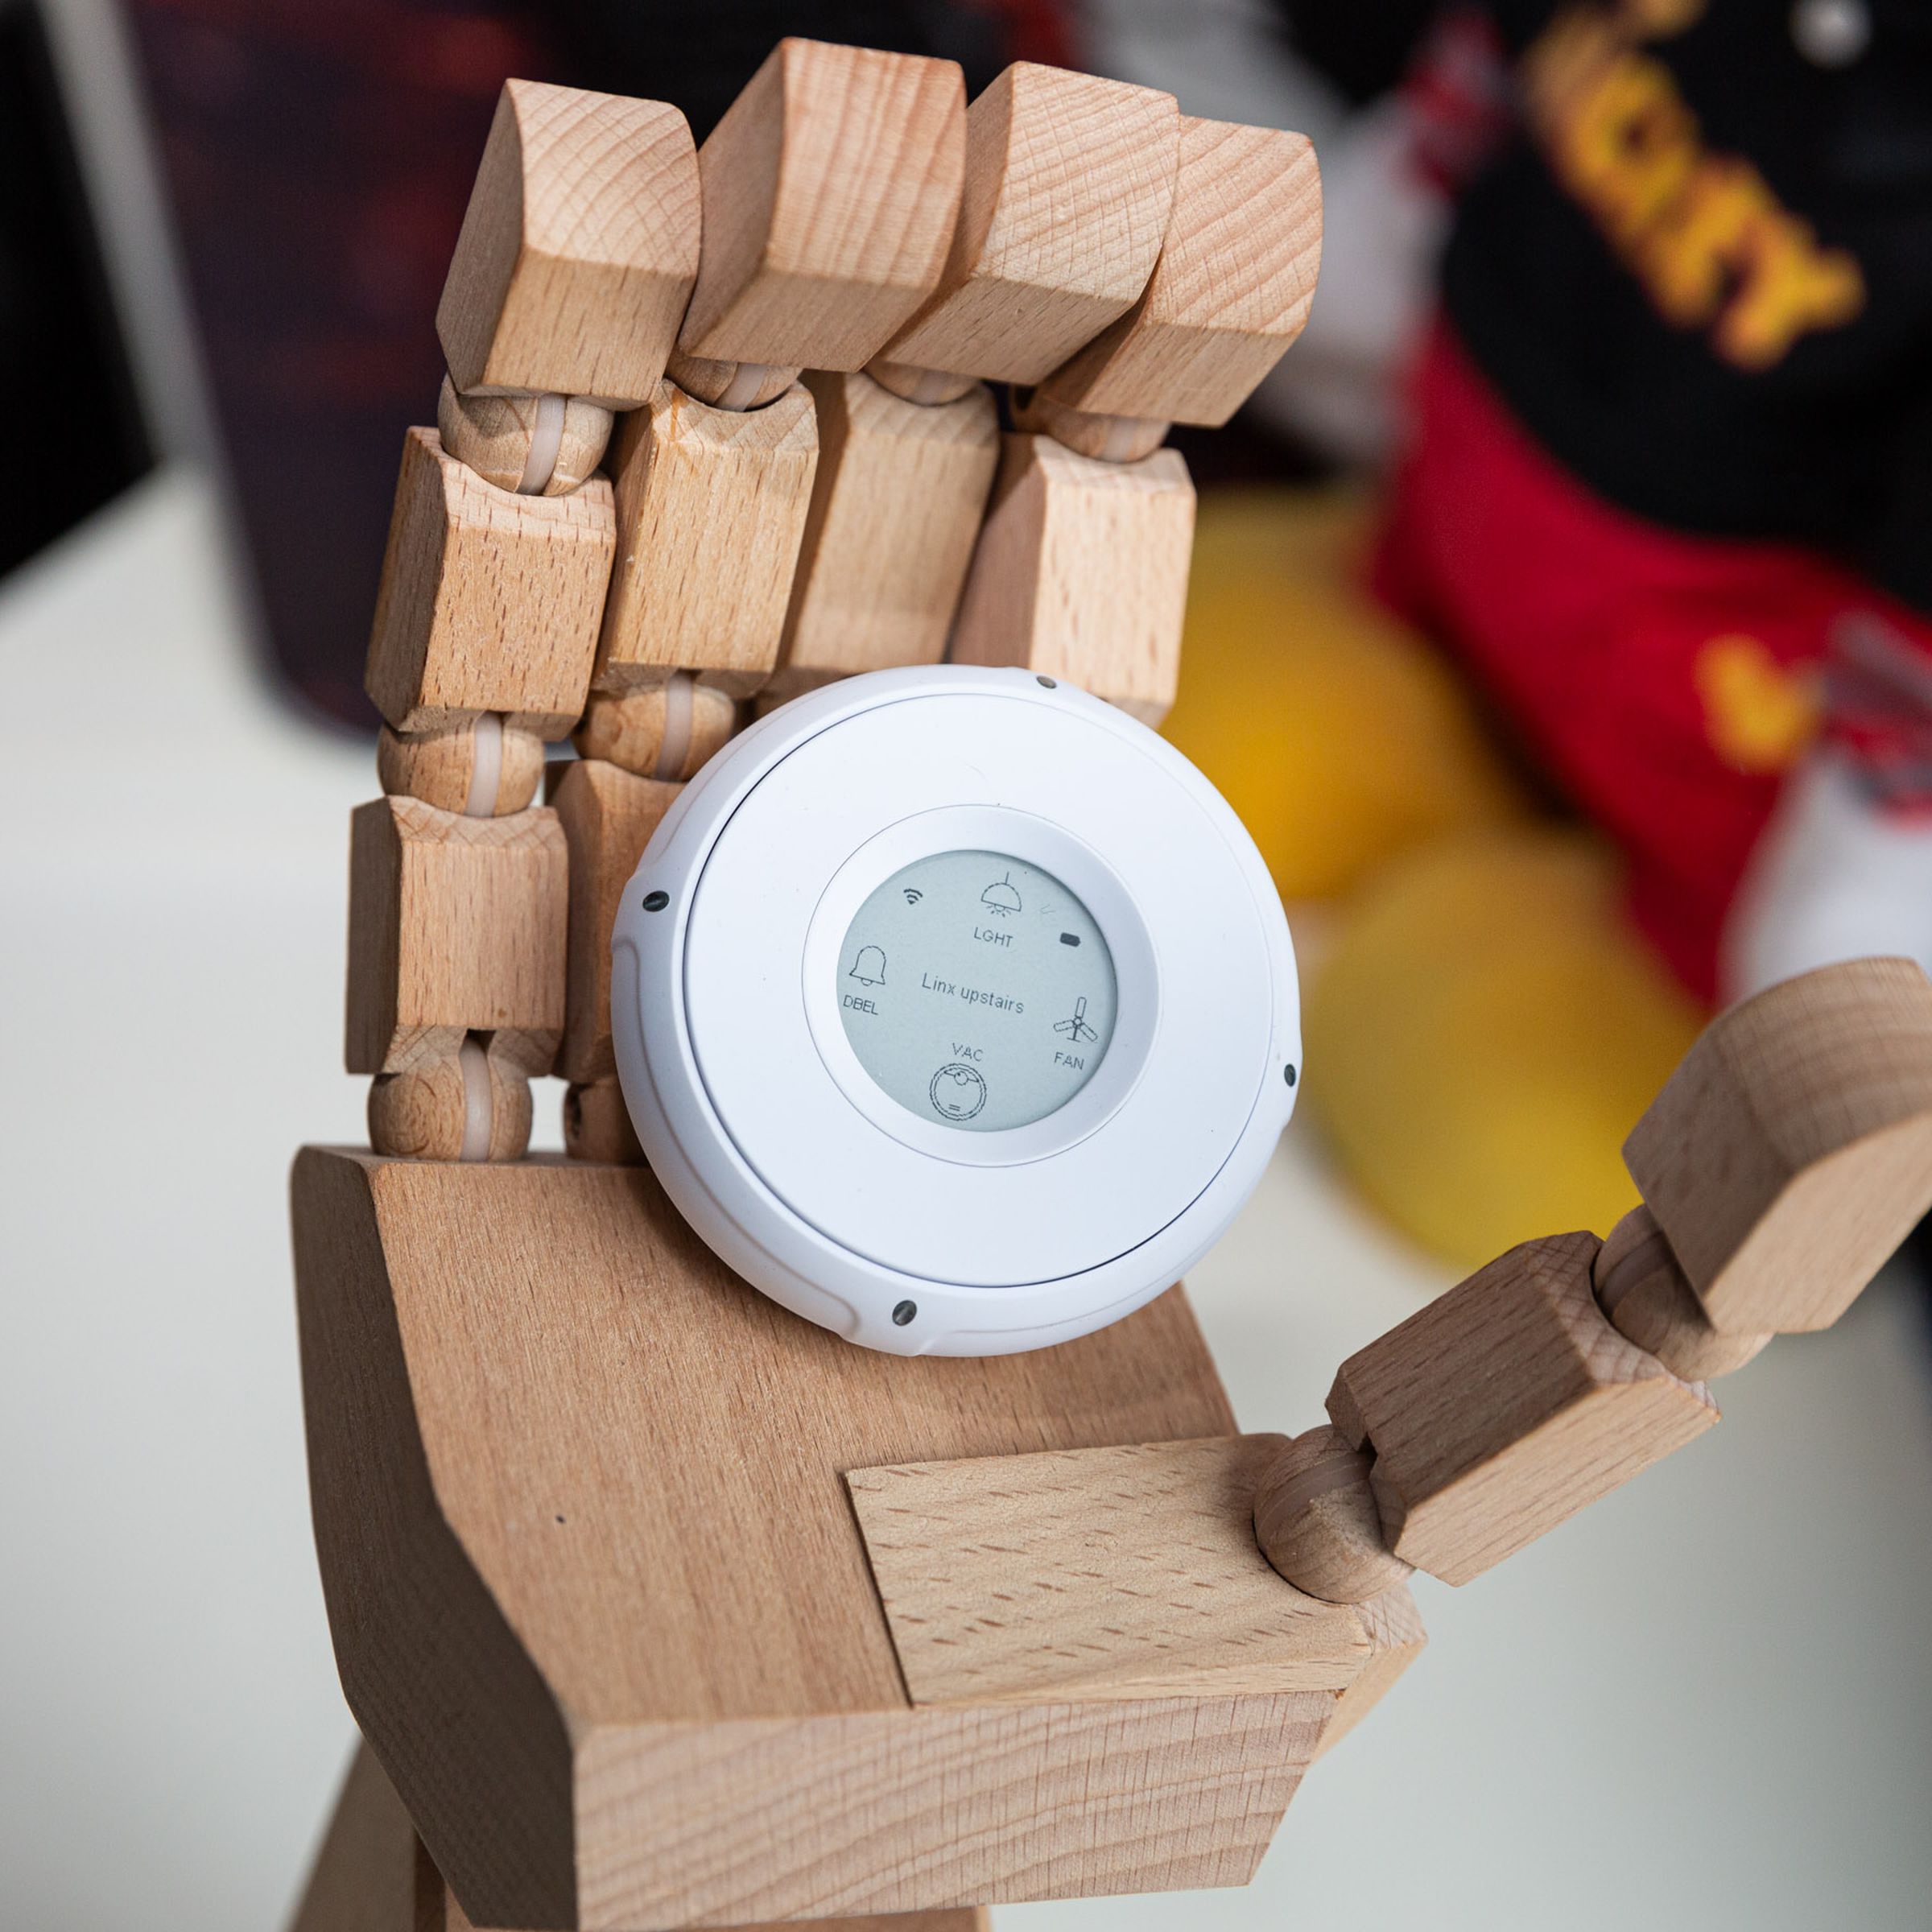 A white smart button with an e-paper screen in a wooden model hand on a desk.